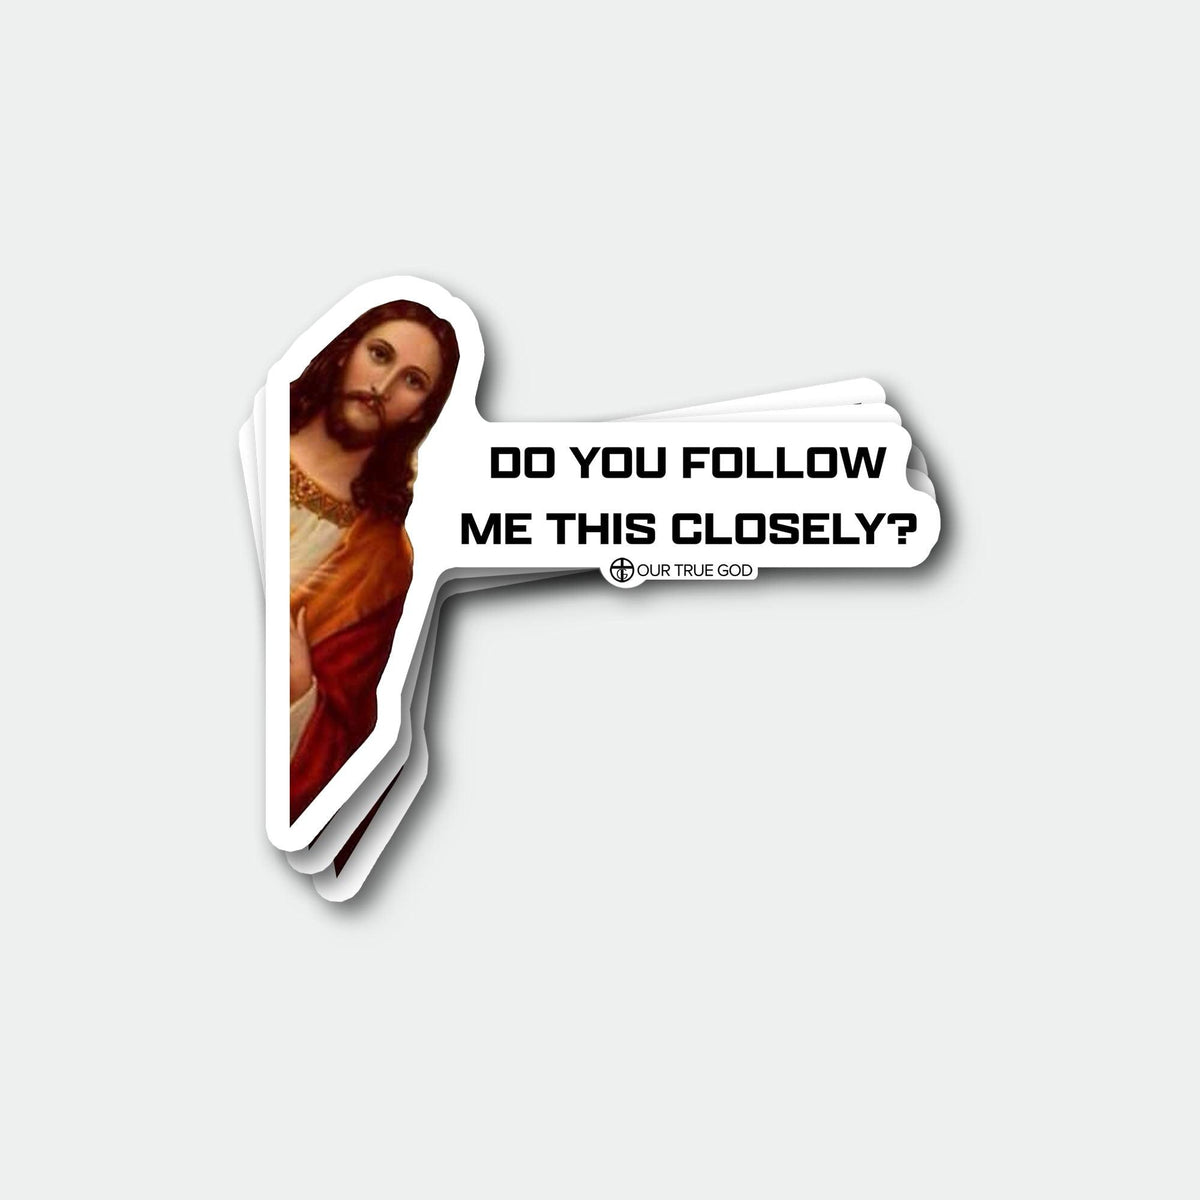 Do You Follow Me This Closely? Decals - Our True God